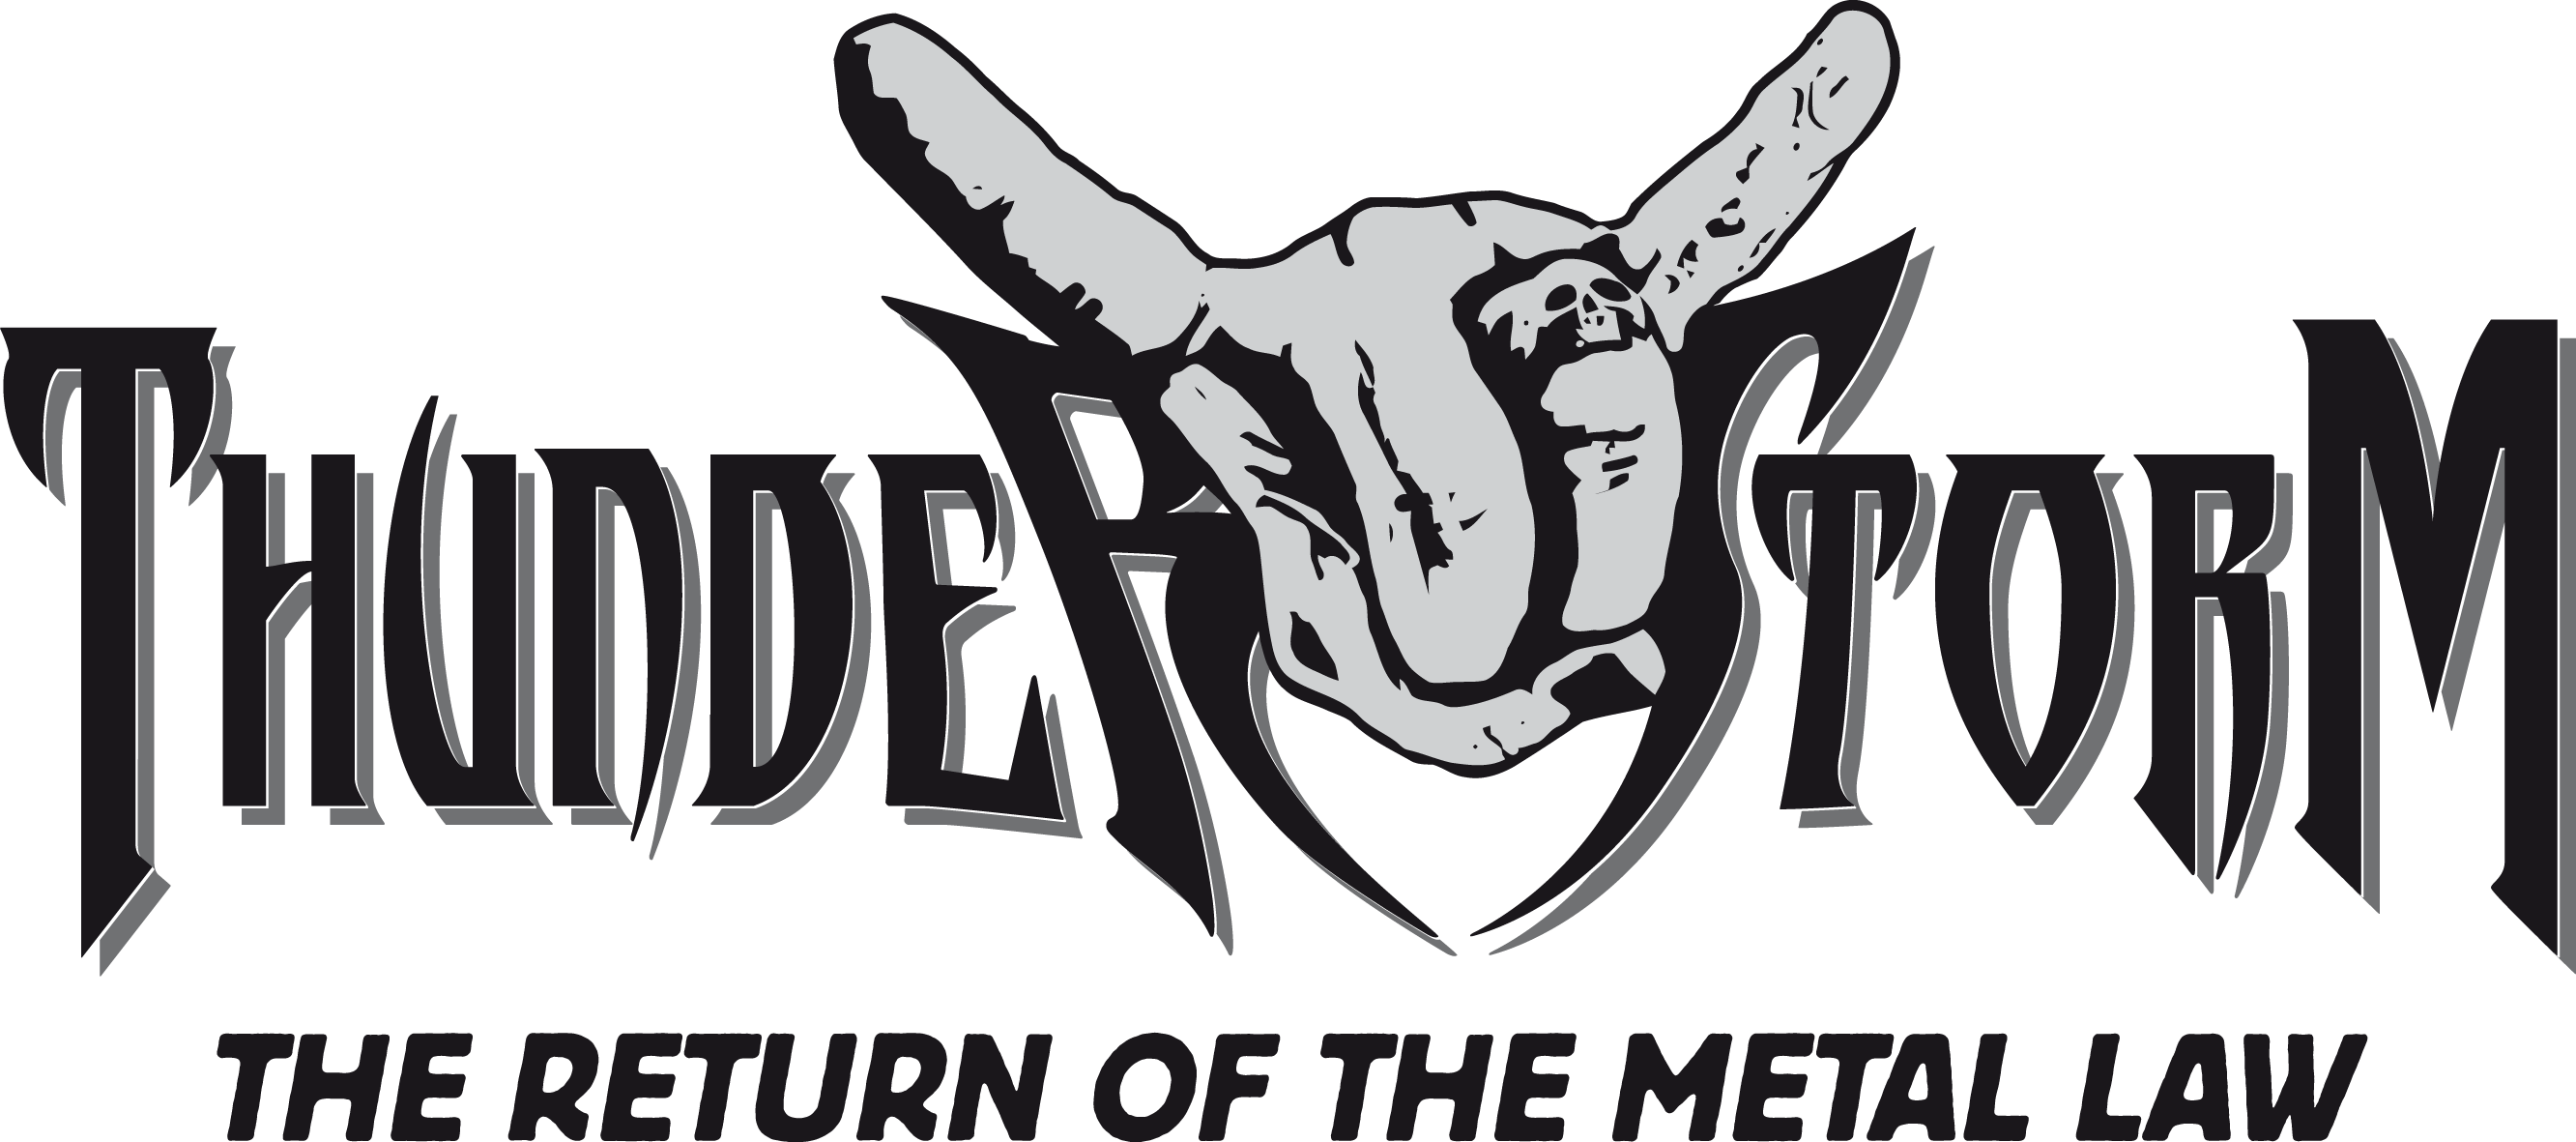 Thunderstorm Logo - Thunderstorm – The Return of the Law – 80s Metal